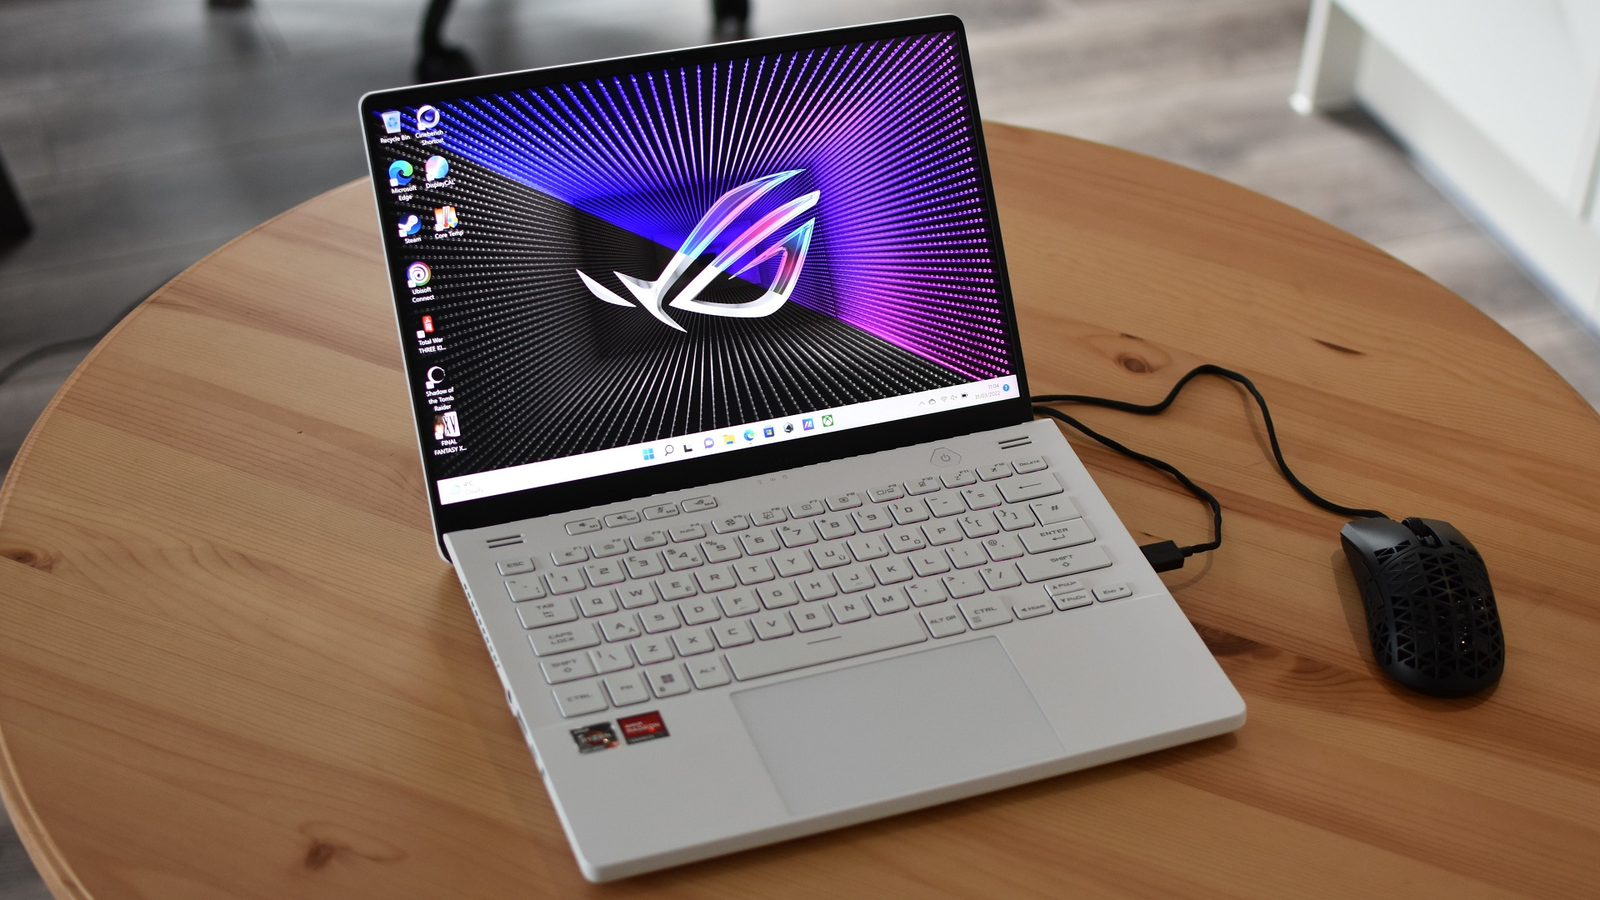 Asus ROG Zephyrus G14 review: a launch party of AMD hardware